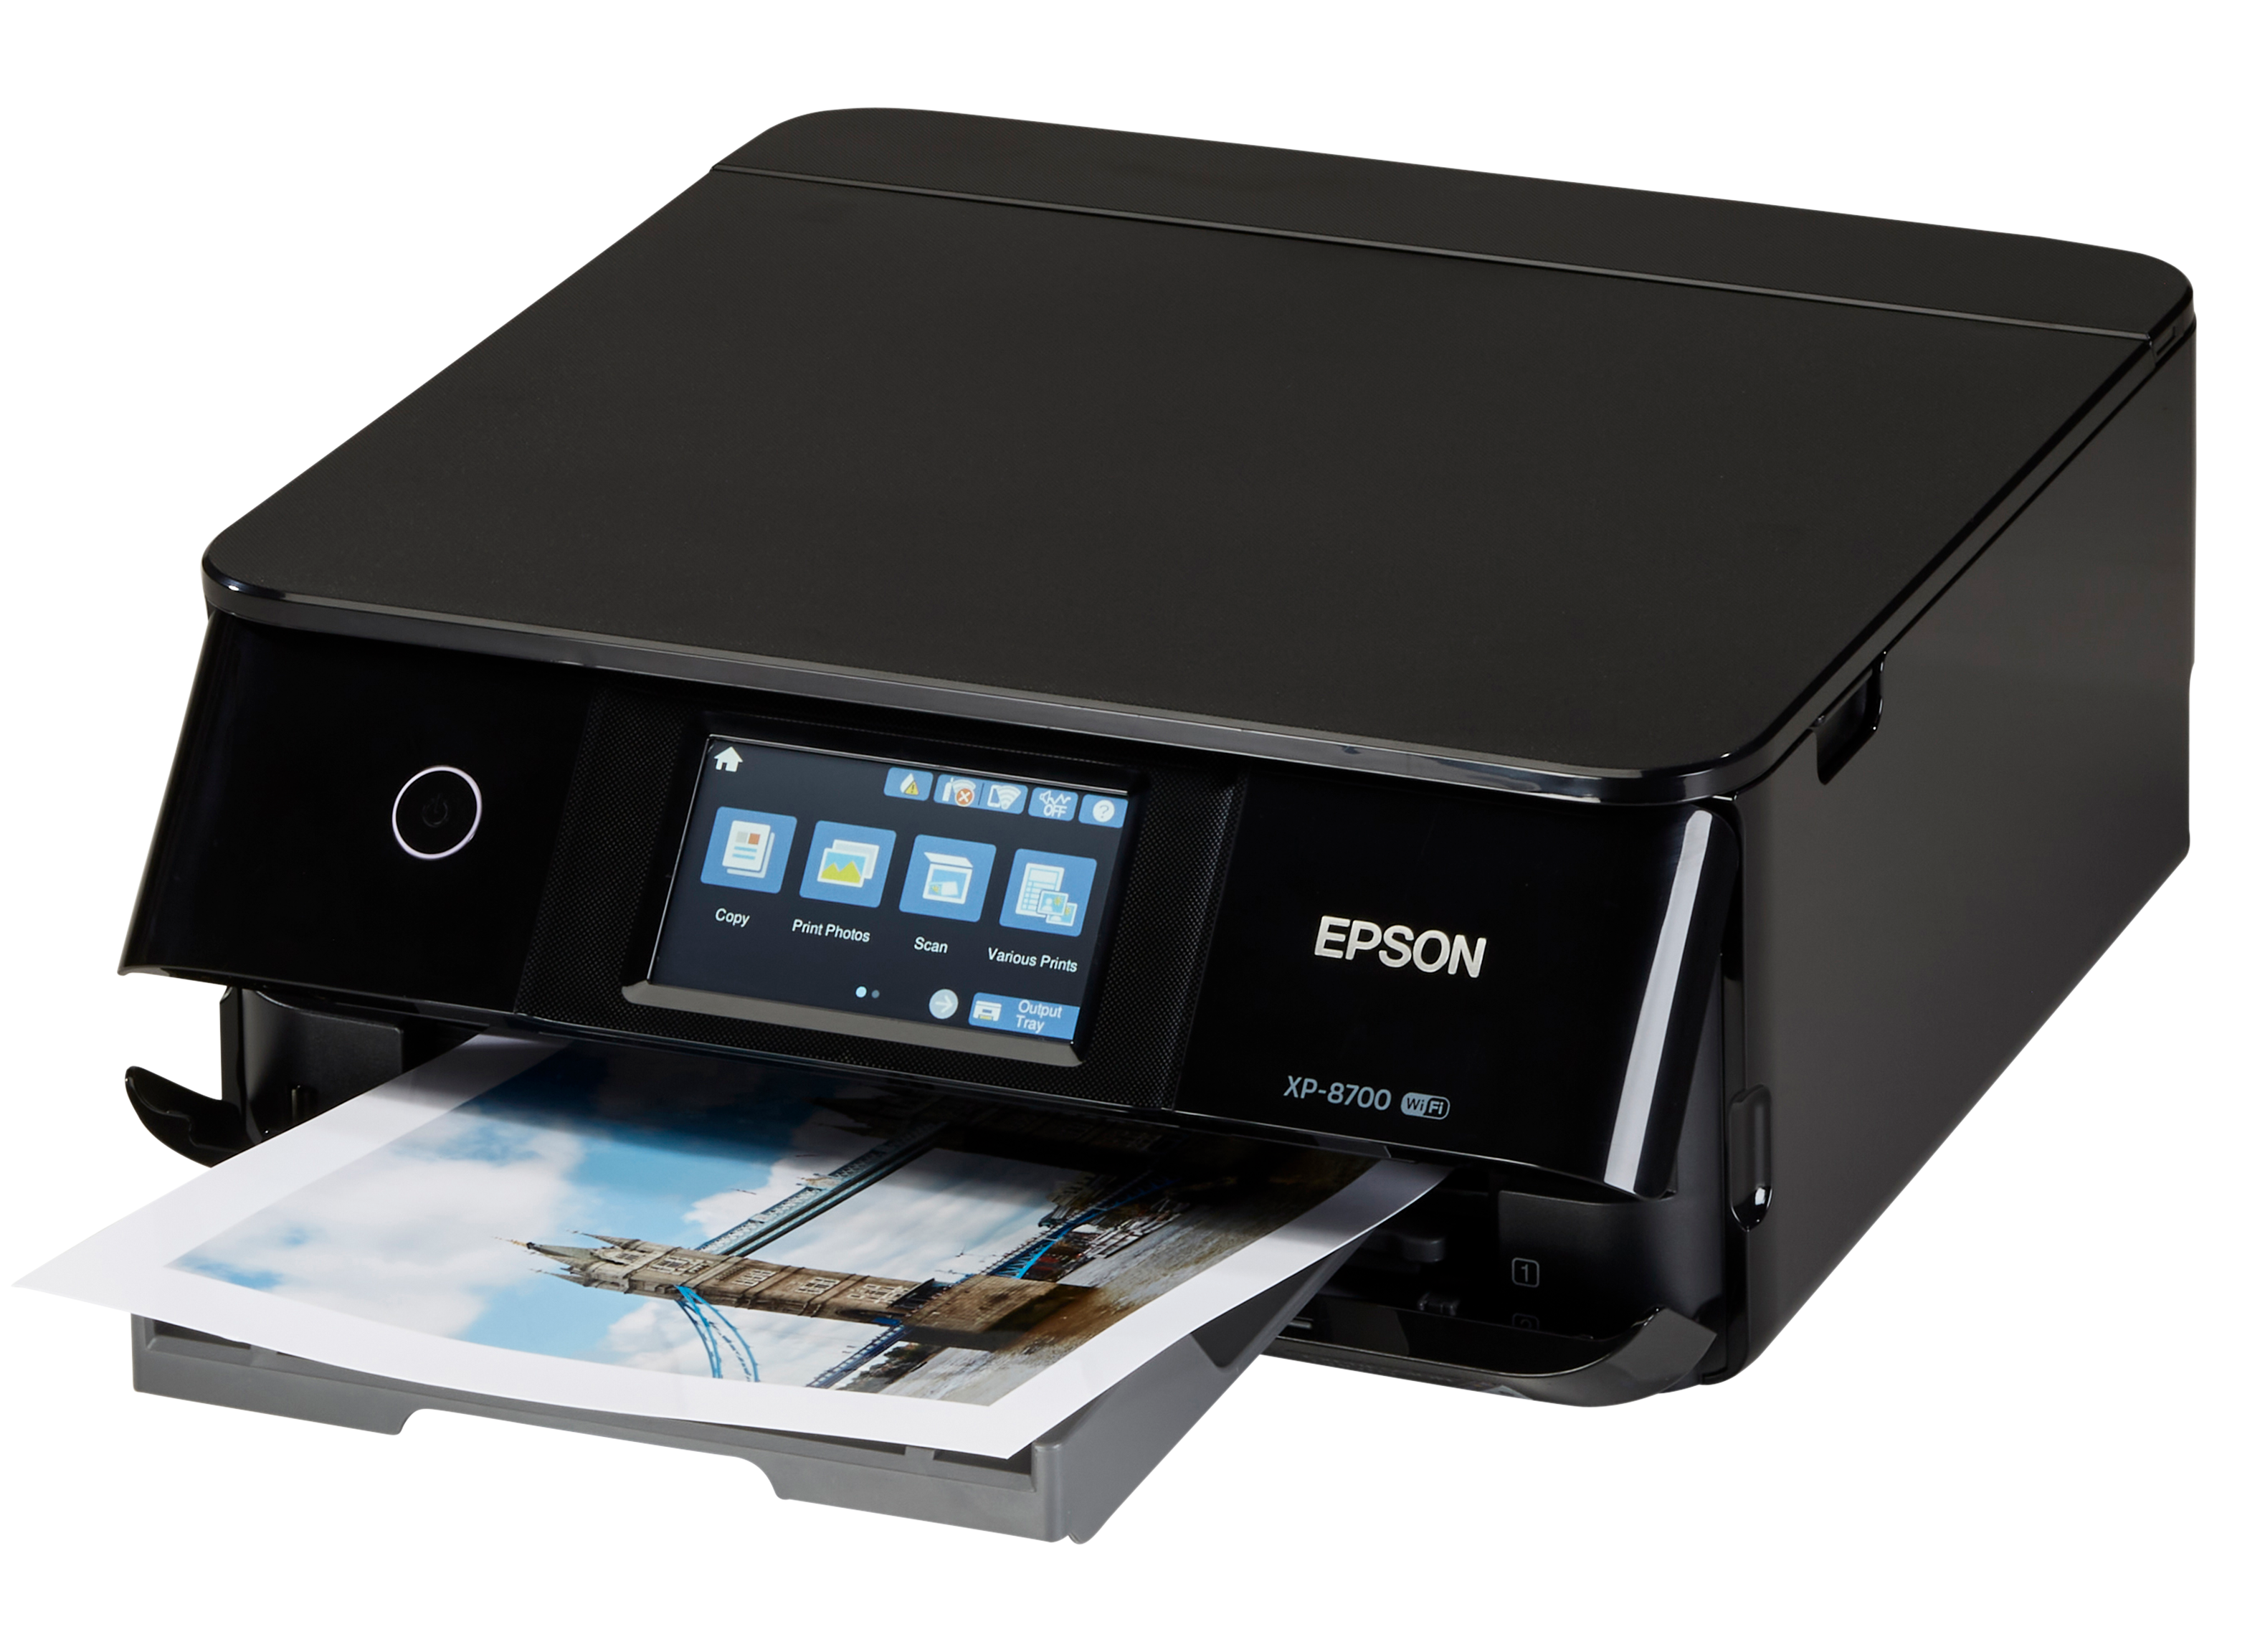 XP-8700 Expression Photo Review Consumer Reports Epson Printer -